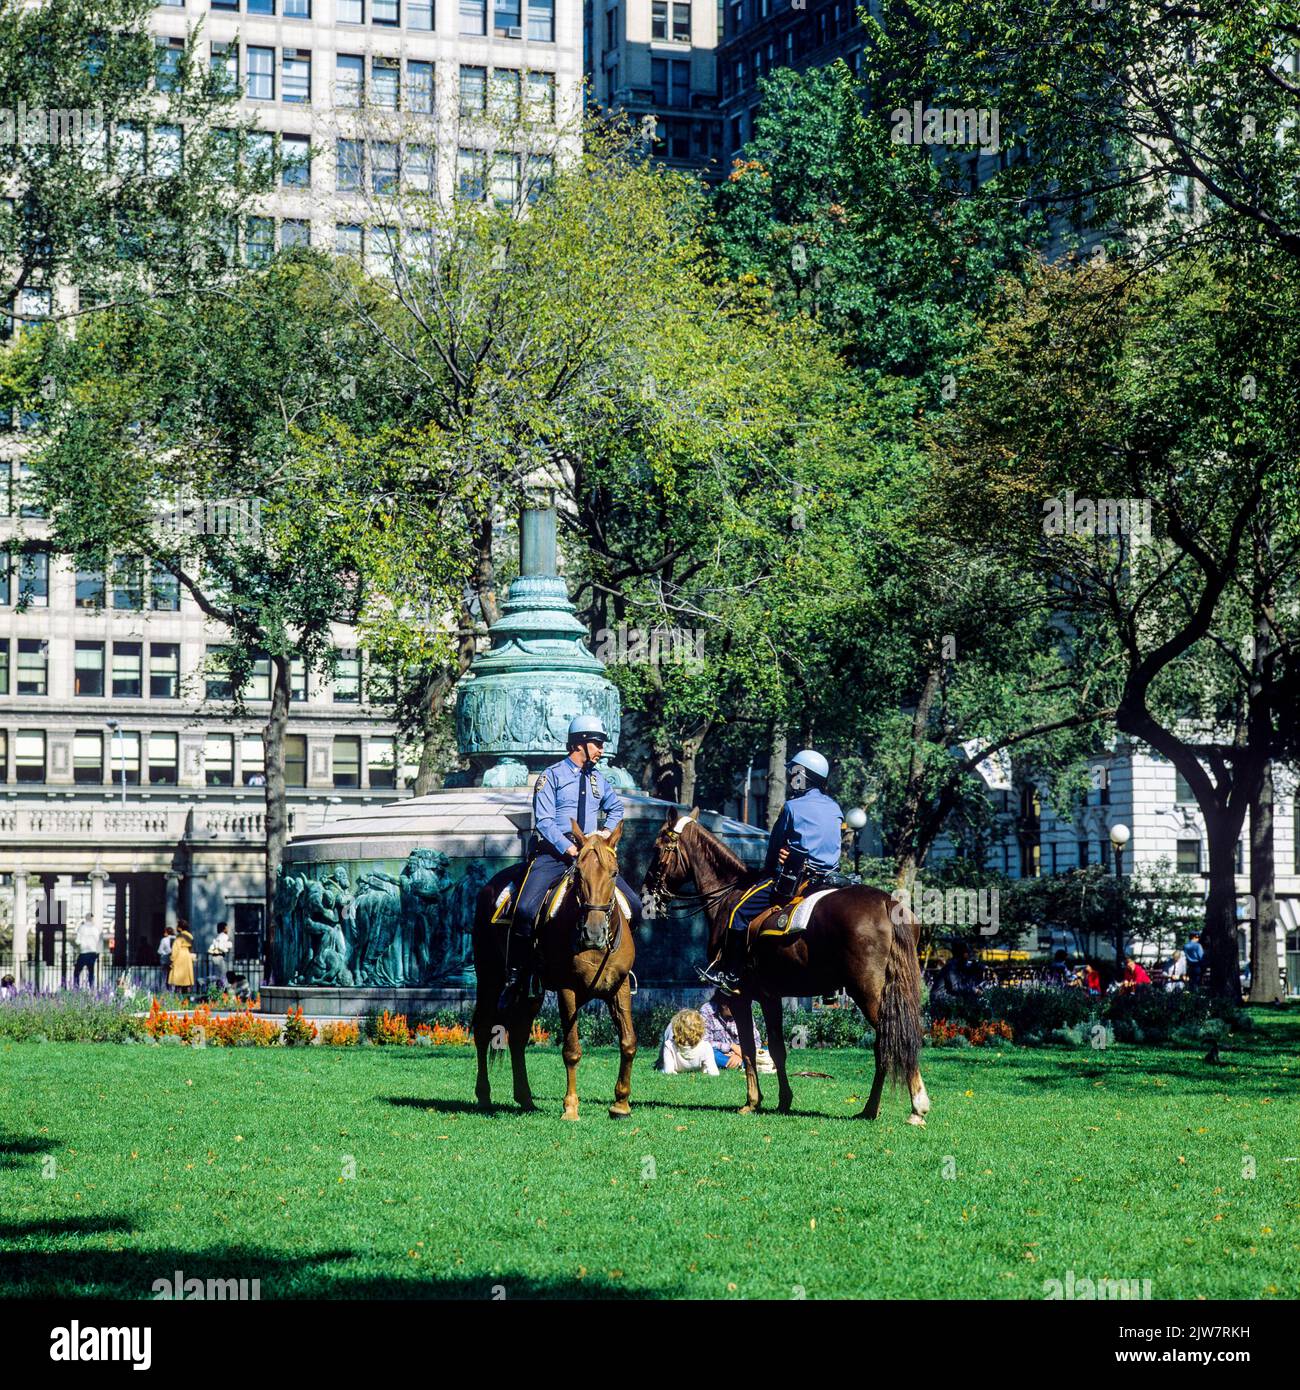 New York, 1980s, 2 NYPD police officers on horseback, Independence flagstaff, Union square park, Manhattan, New York City, NYC, NY, USA, Stock Photo